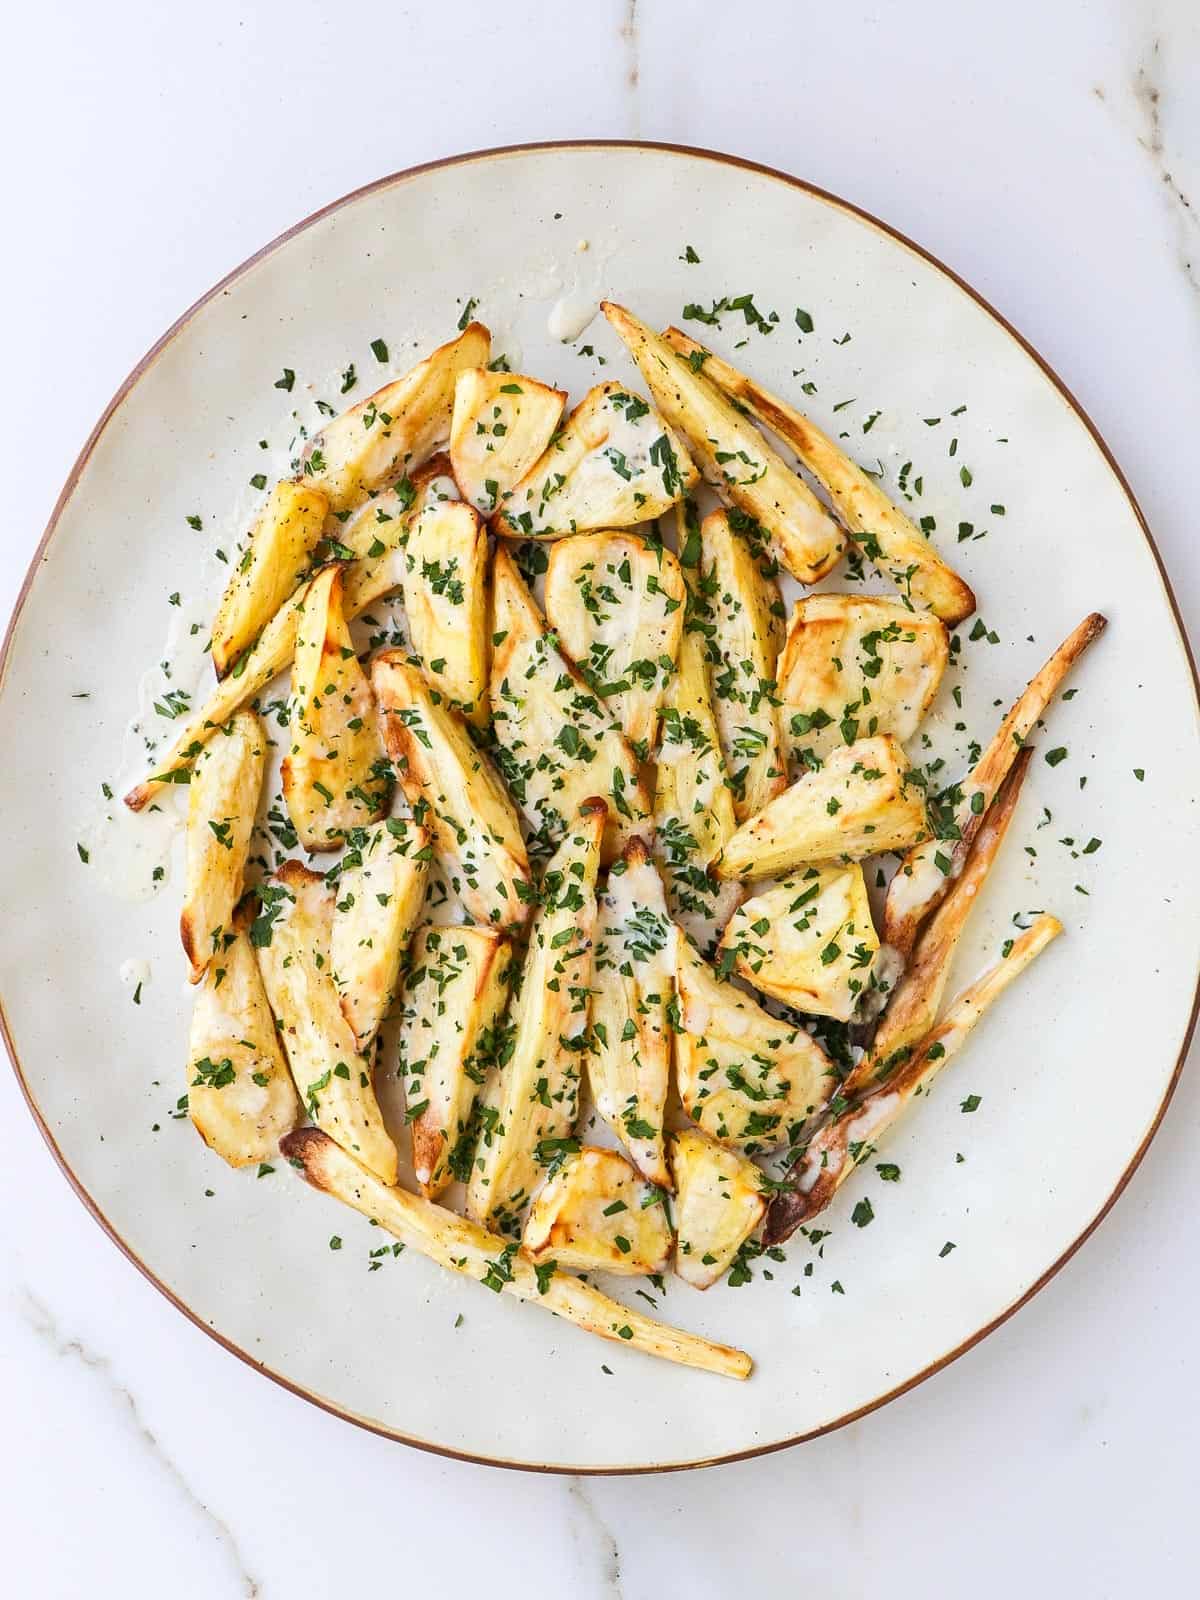 Air fried parsnips on a plate with tahini sauce and parsley.